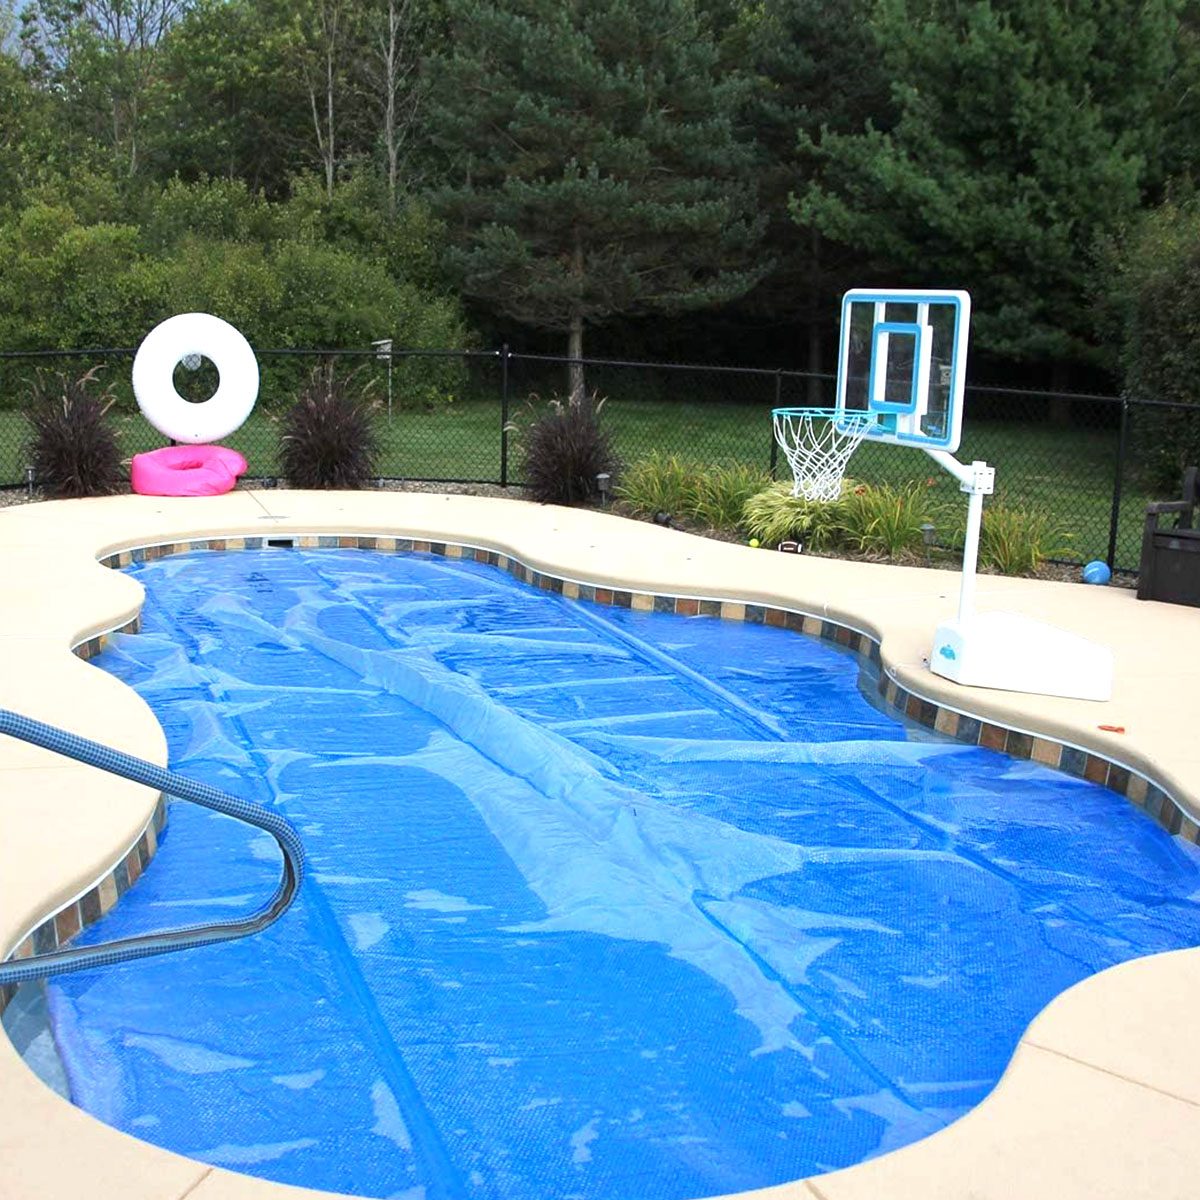 Which cover is right for your pool? Here are different types of pool covers!